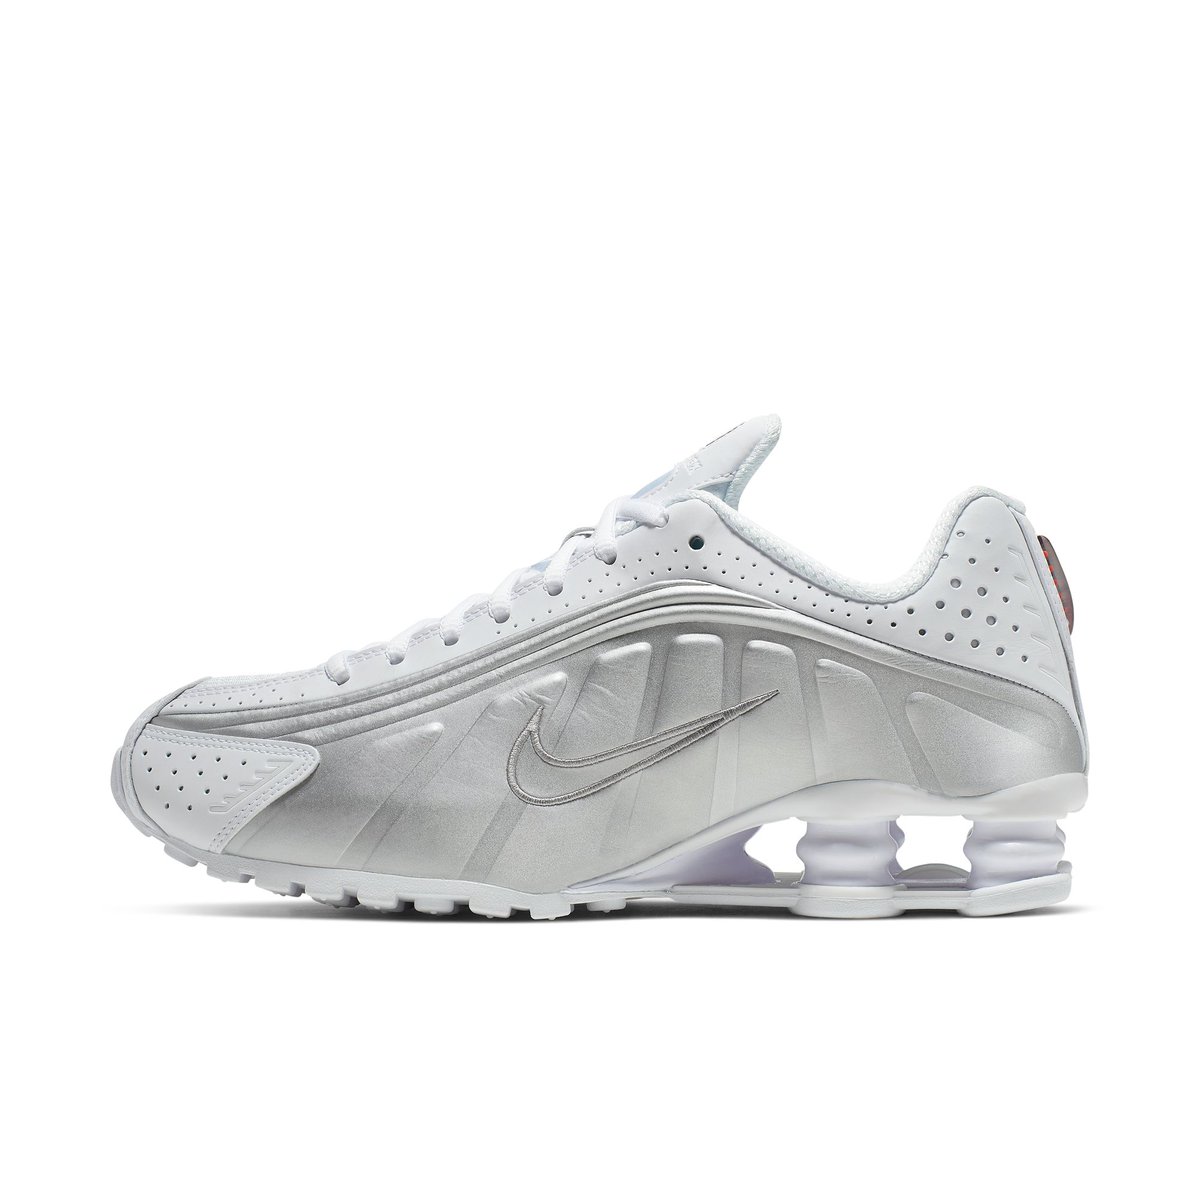 The Women's Nike Shox R4 - 'Metallic Silver' is now available on our online store. soleplayatl.com/products/women…